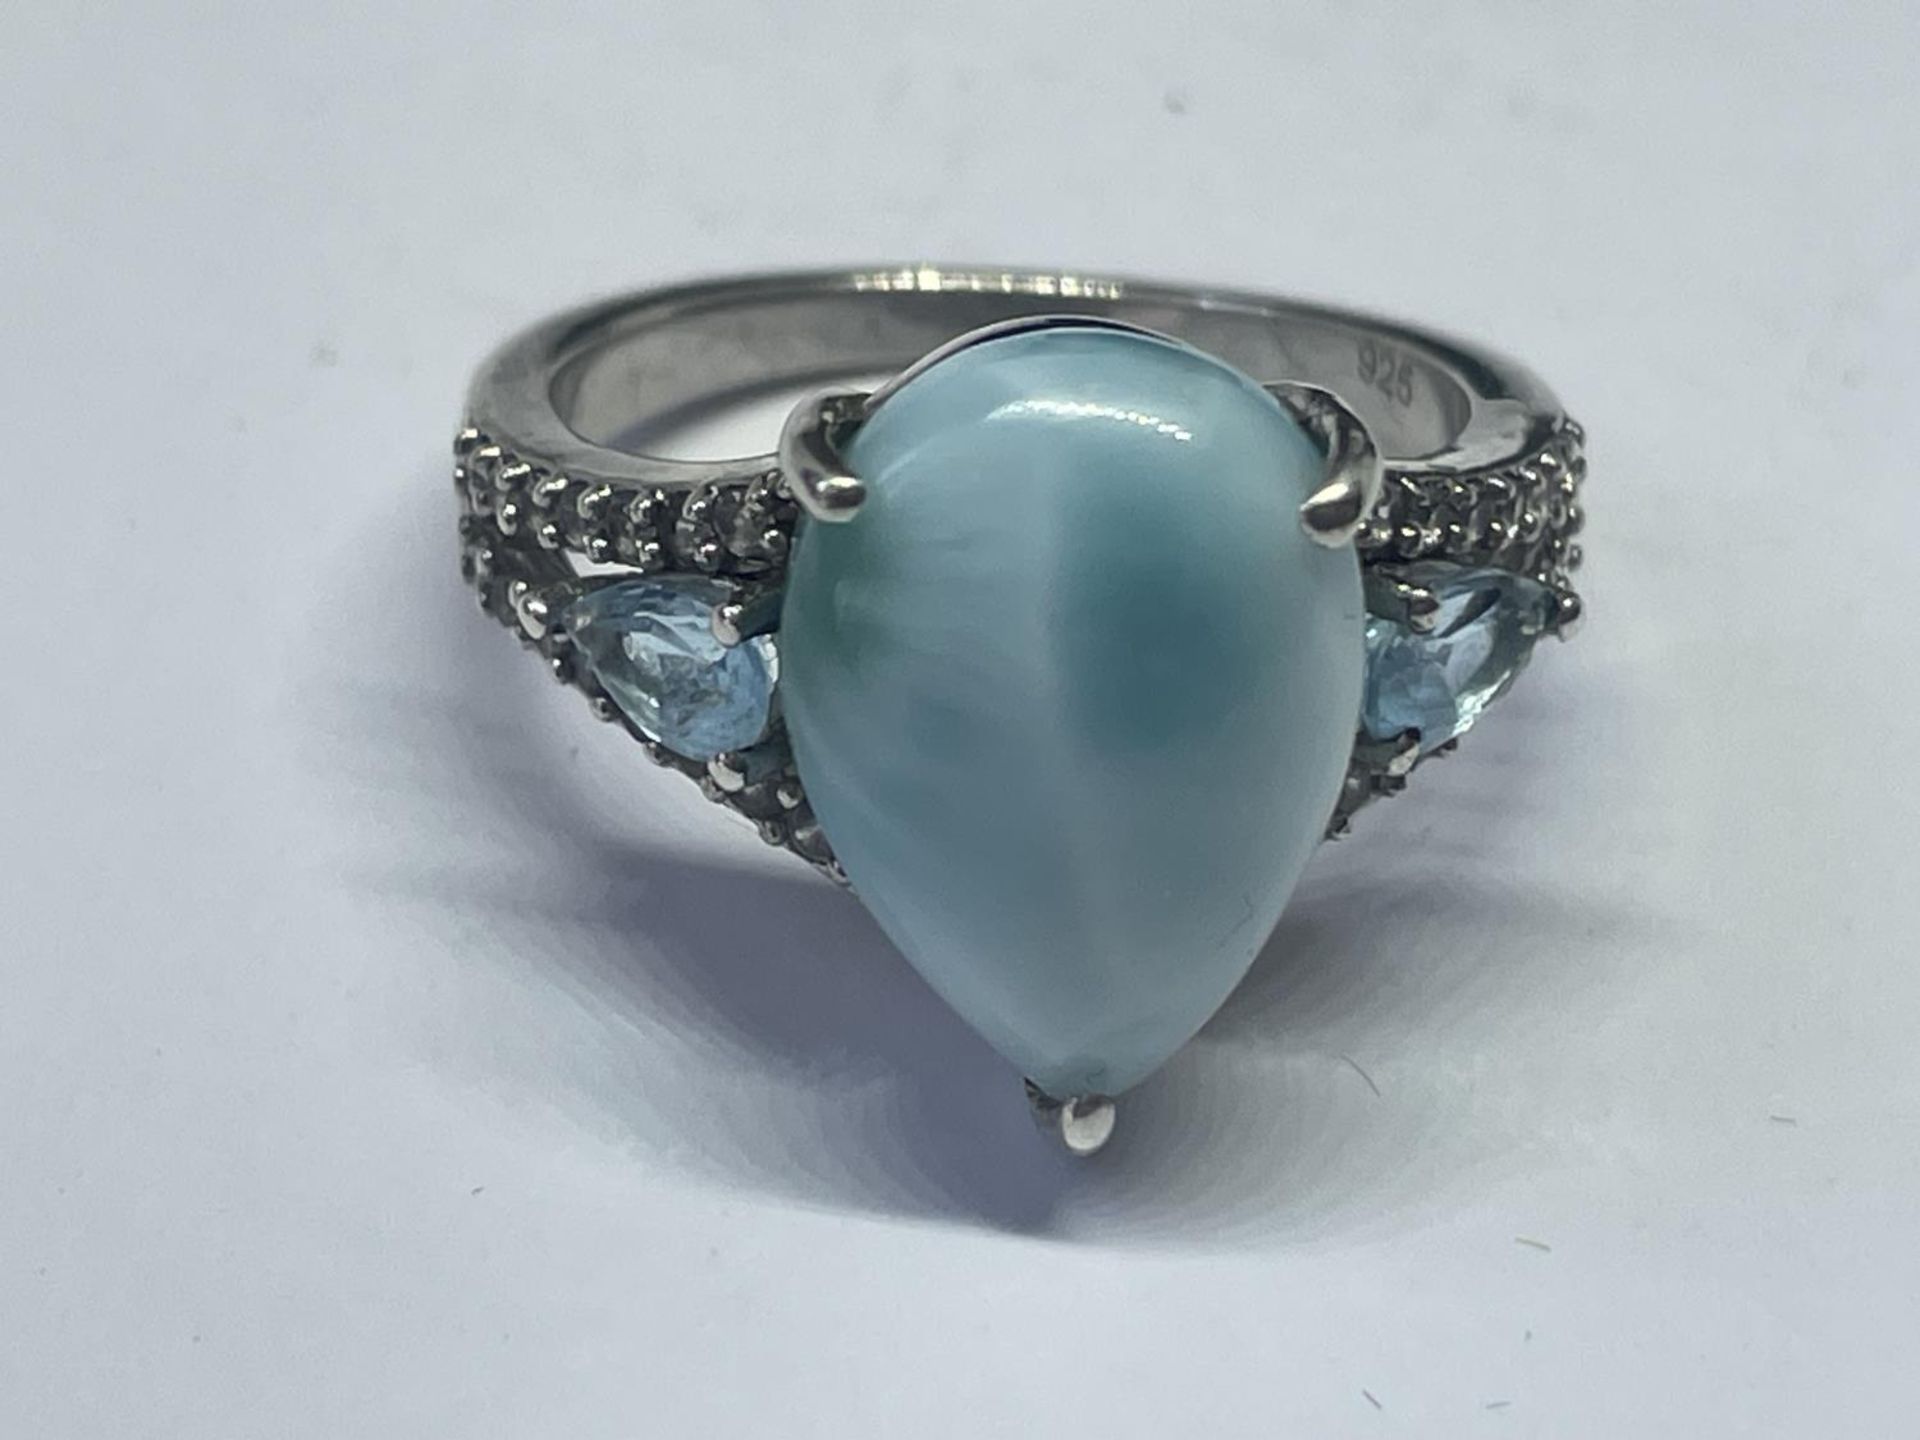 A SILVER DRESS RING IN A PRESENTATION BOX - Image 2 of 3